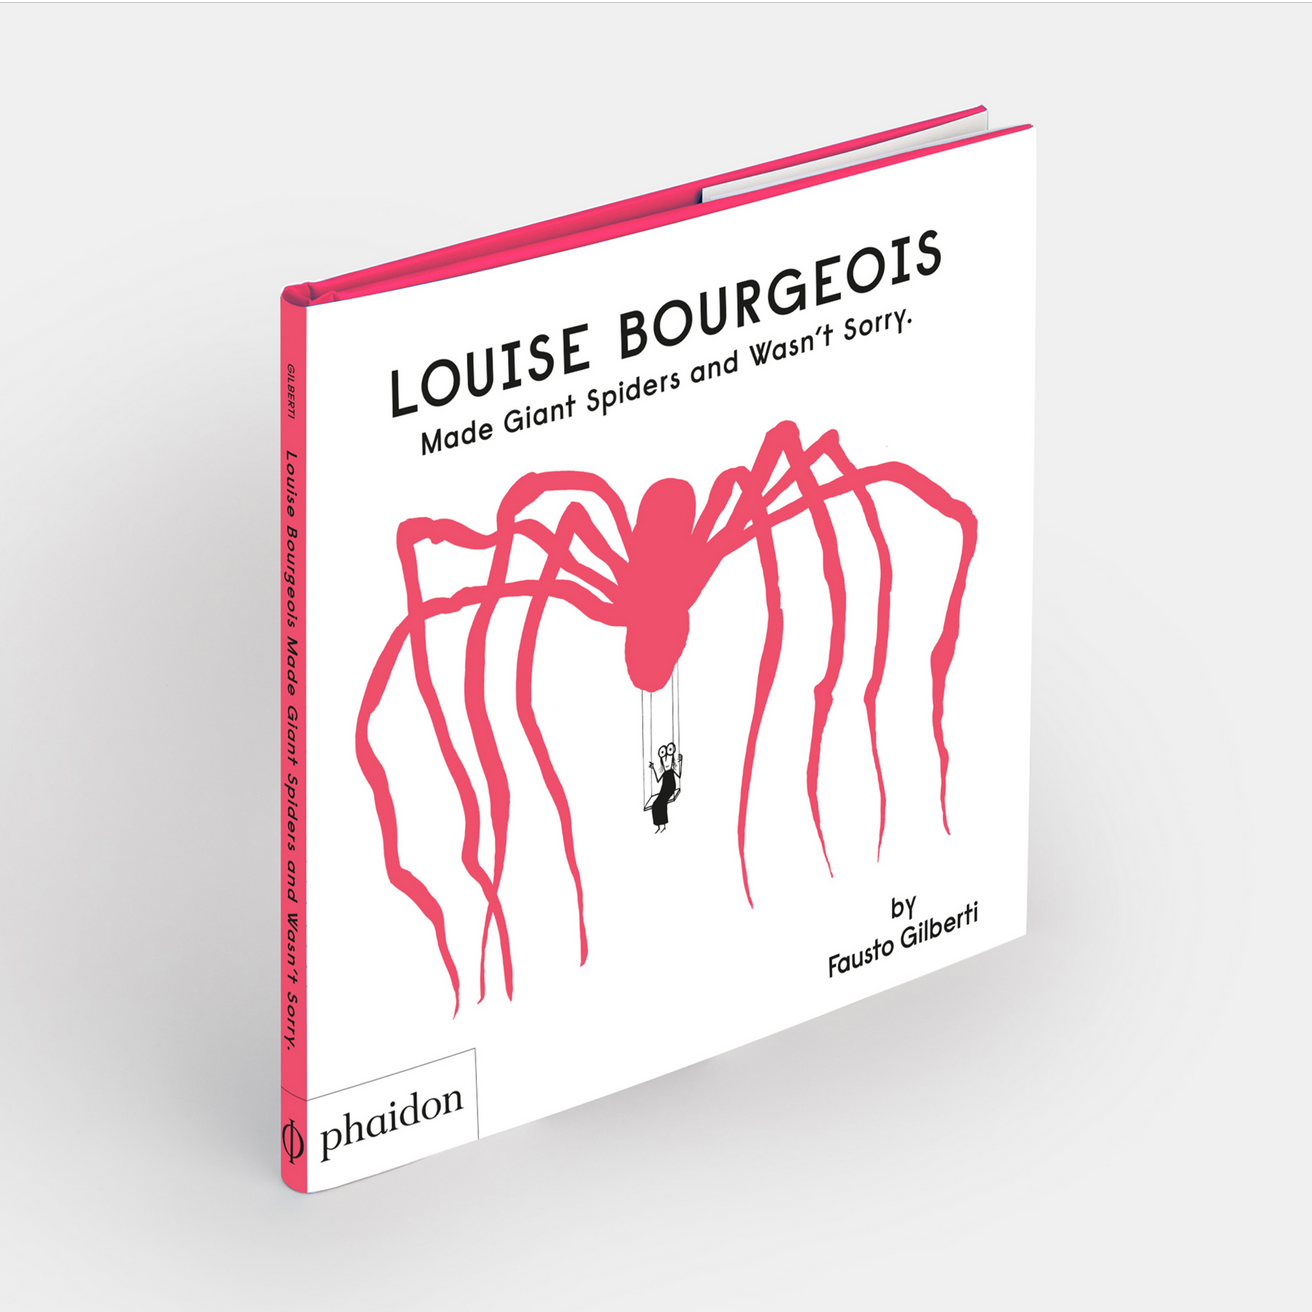 LOUISE BOURGEOIS: MADED GIANT SPIDERS AND WASN'T SORRY